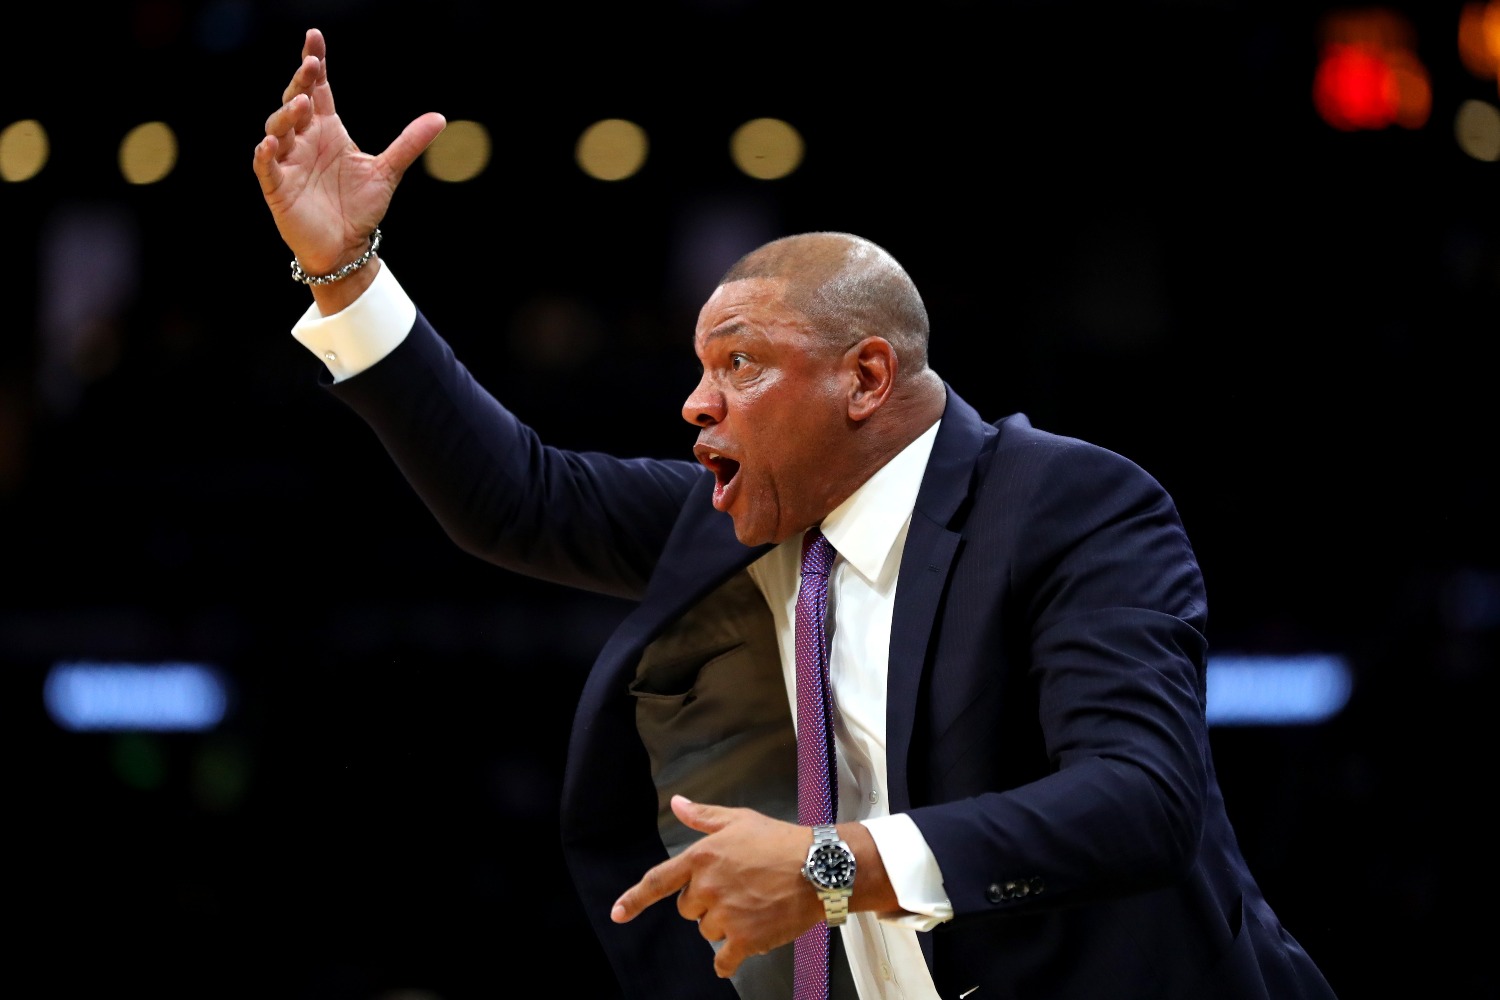 Clippers coach Doc Rivers ripped Donald Trump over the voting controversy that has garnered plenty of attention.